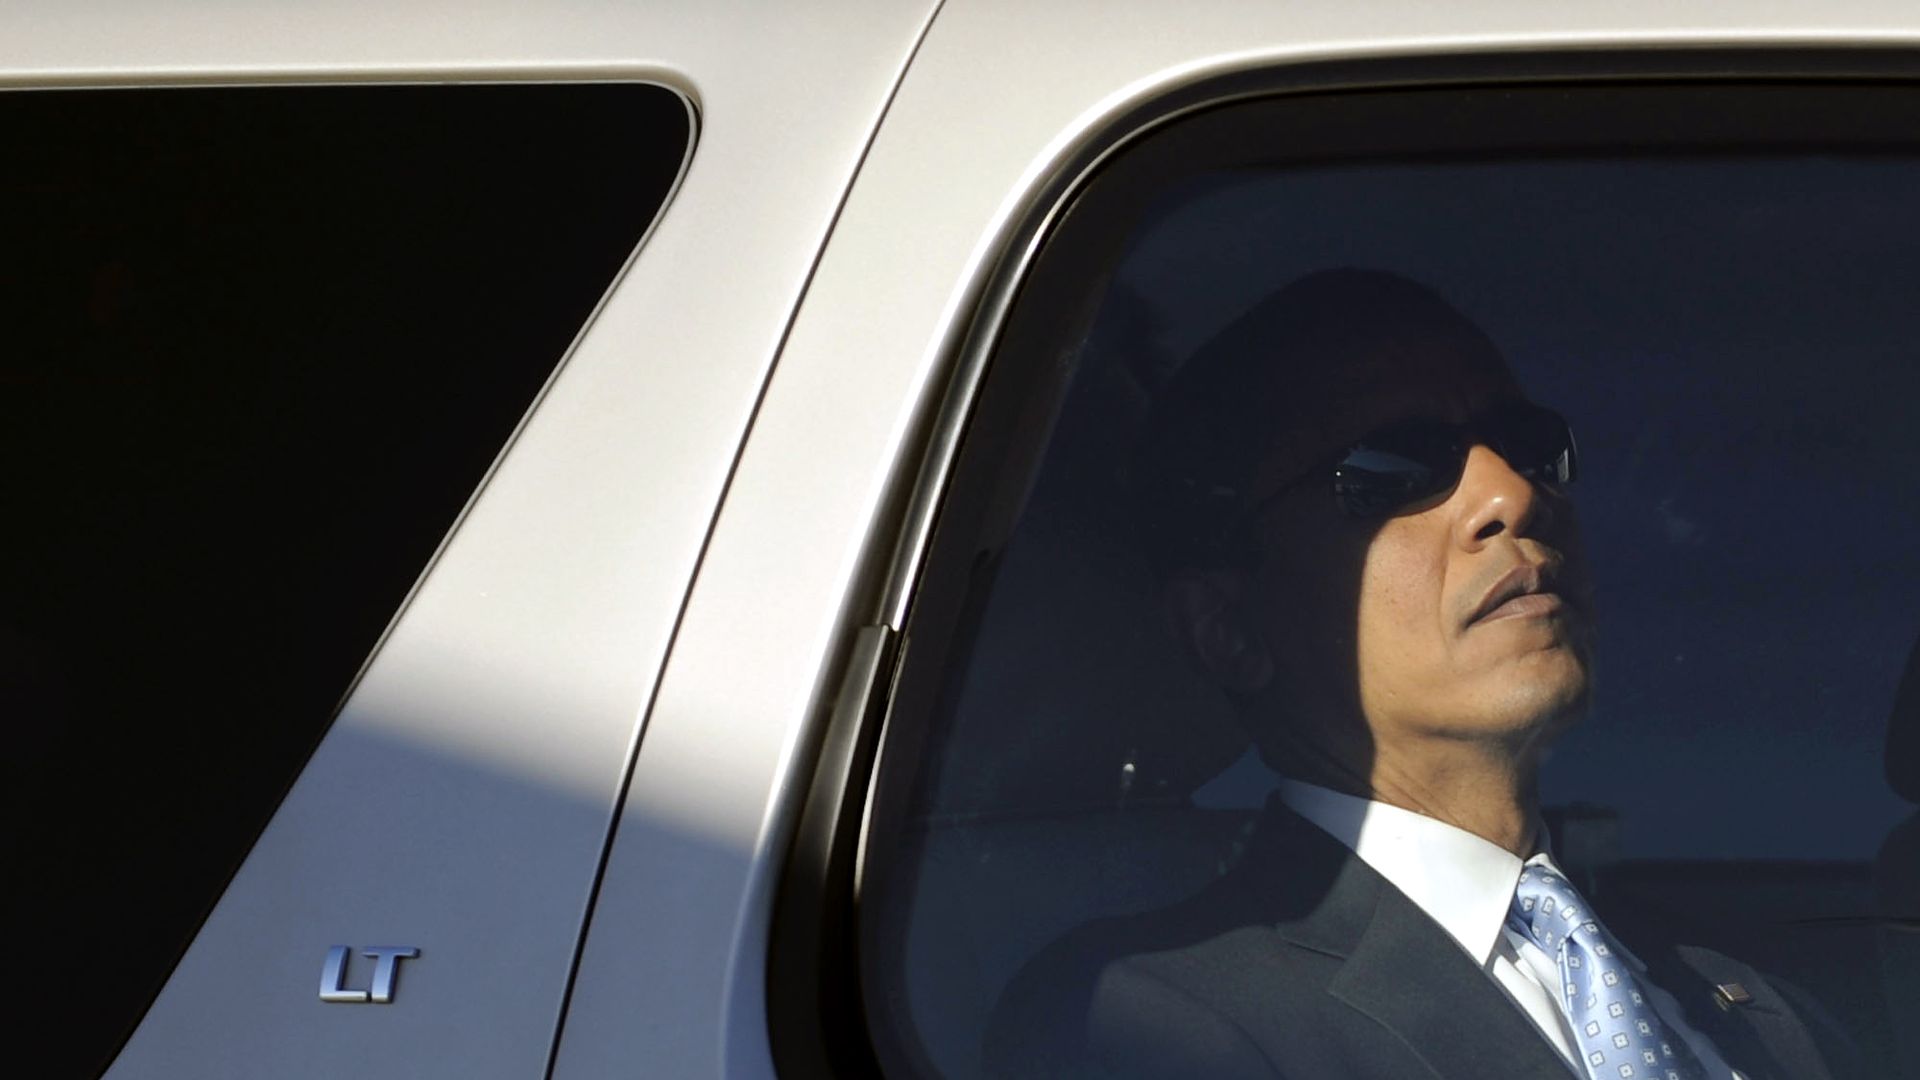 Obama wears sunglasses in the back seat of a car